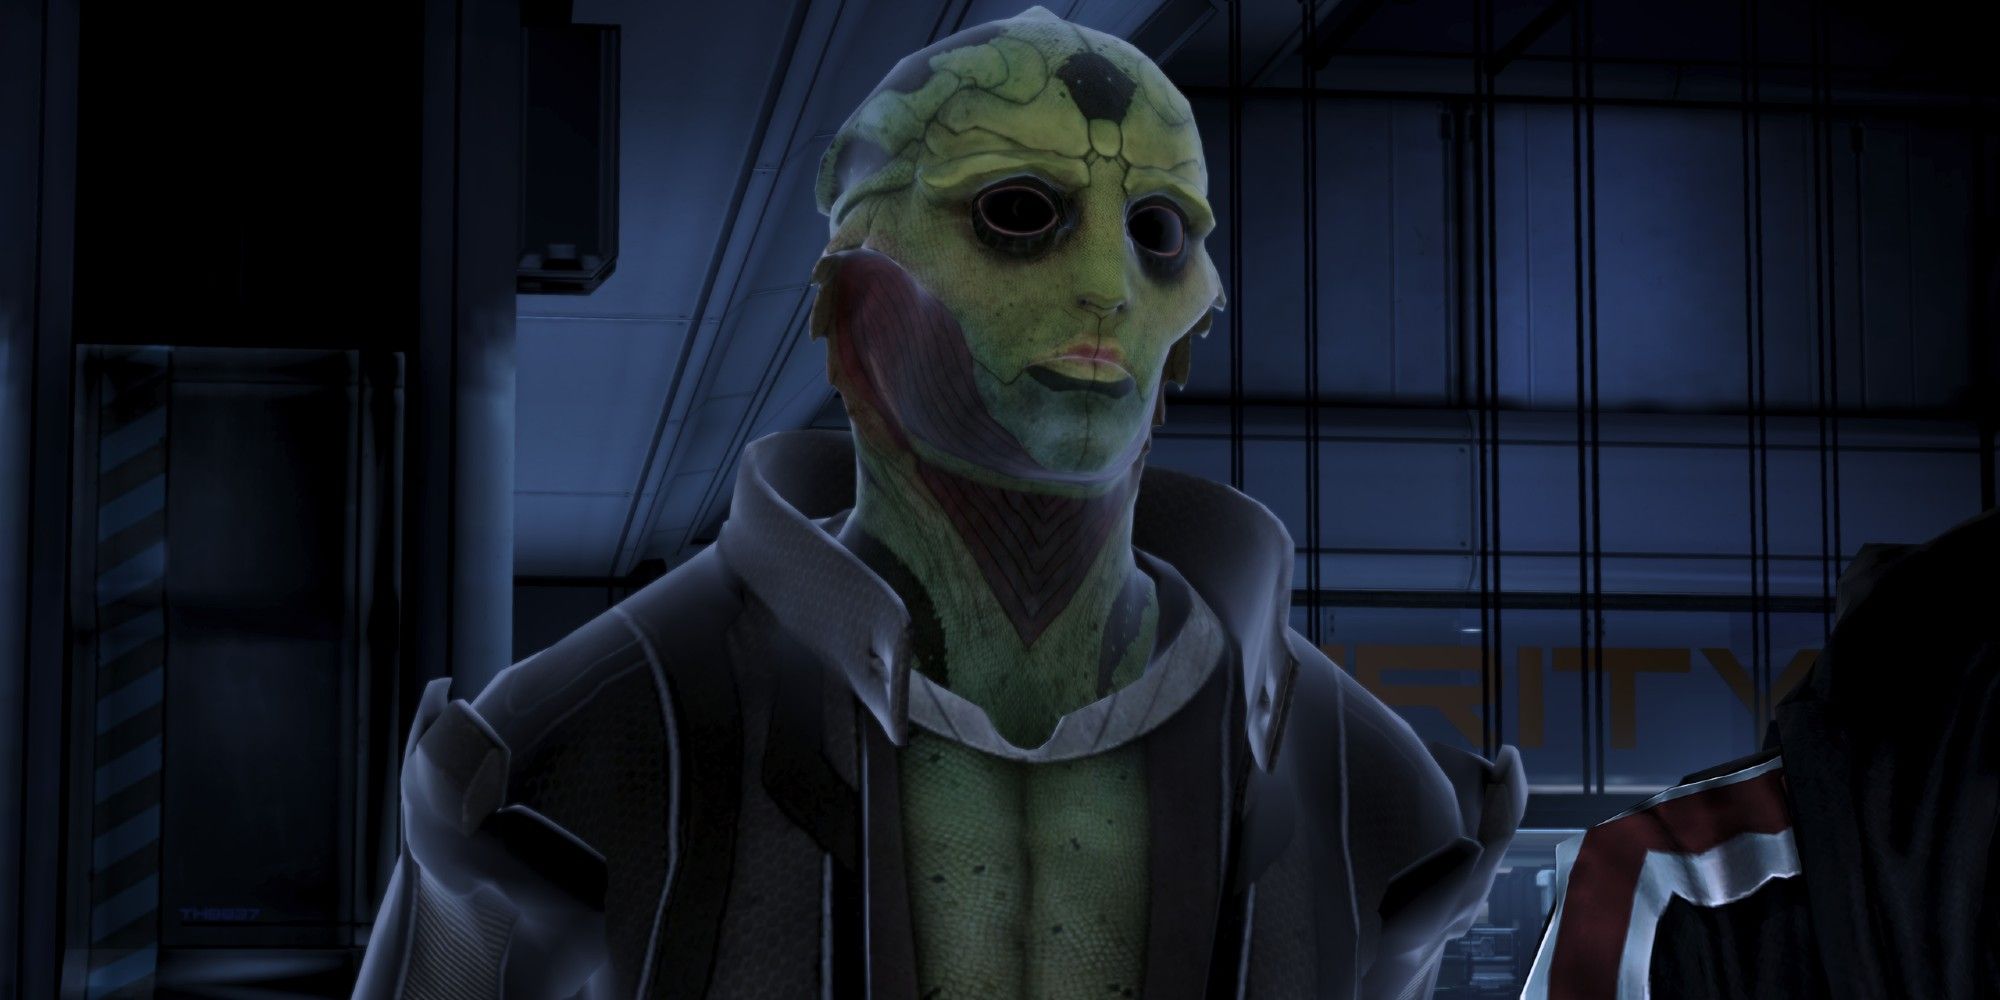 Thane's ghost appears to Shepard after the party in Mass Effect 3: Citadel